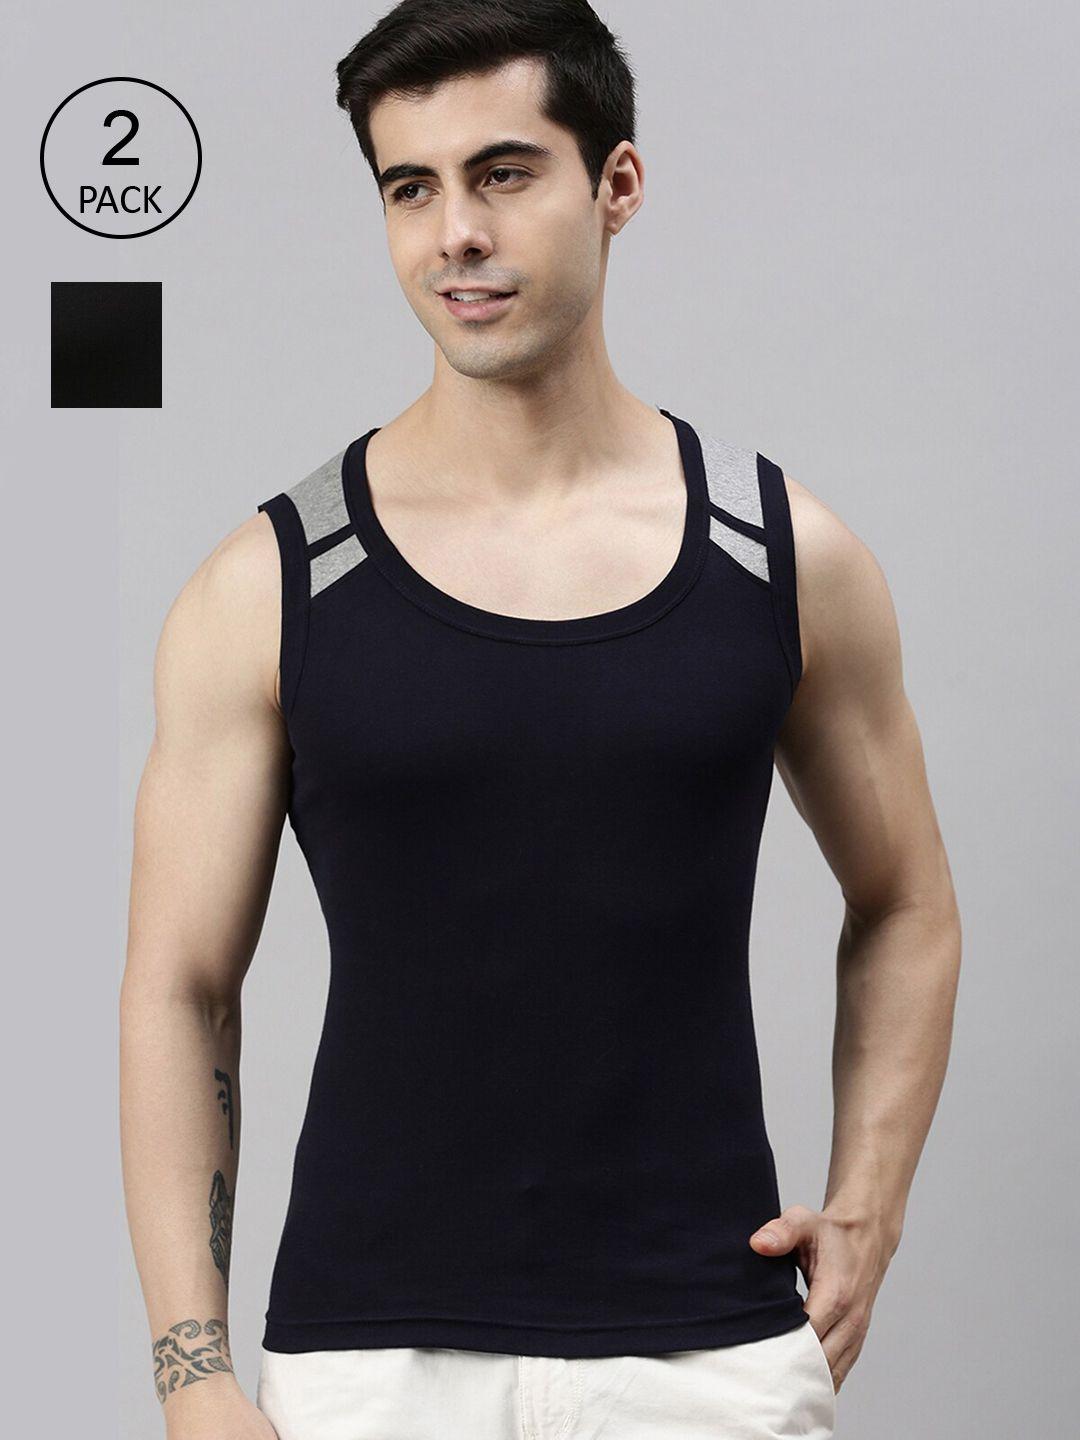 lux-cozi-men-pack-of-2-black-&-navy-blue-solid-pure-cotton-innerwear-vests